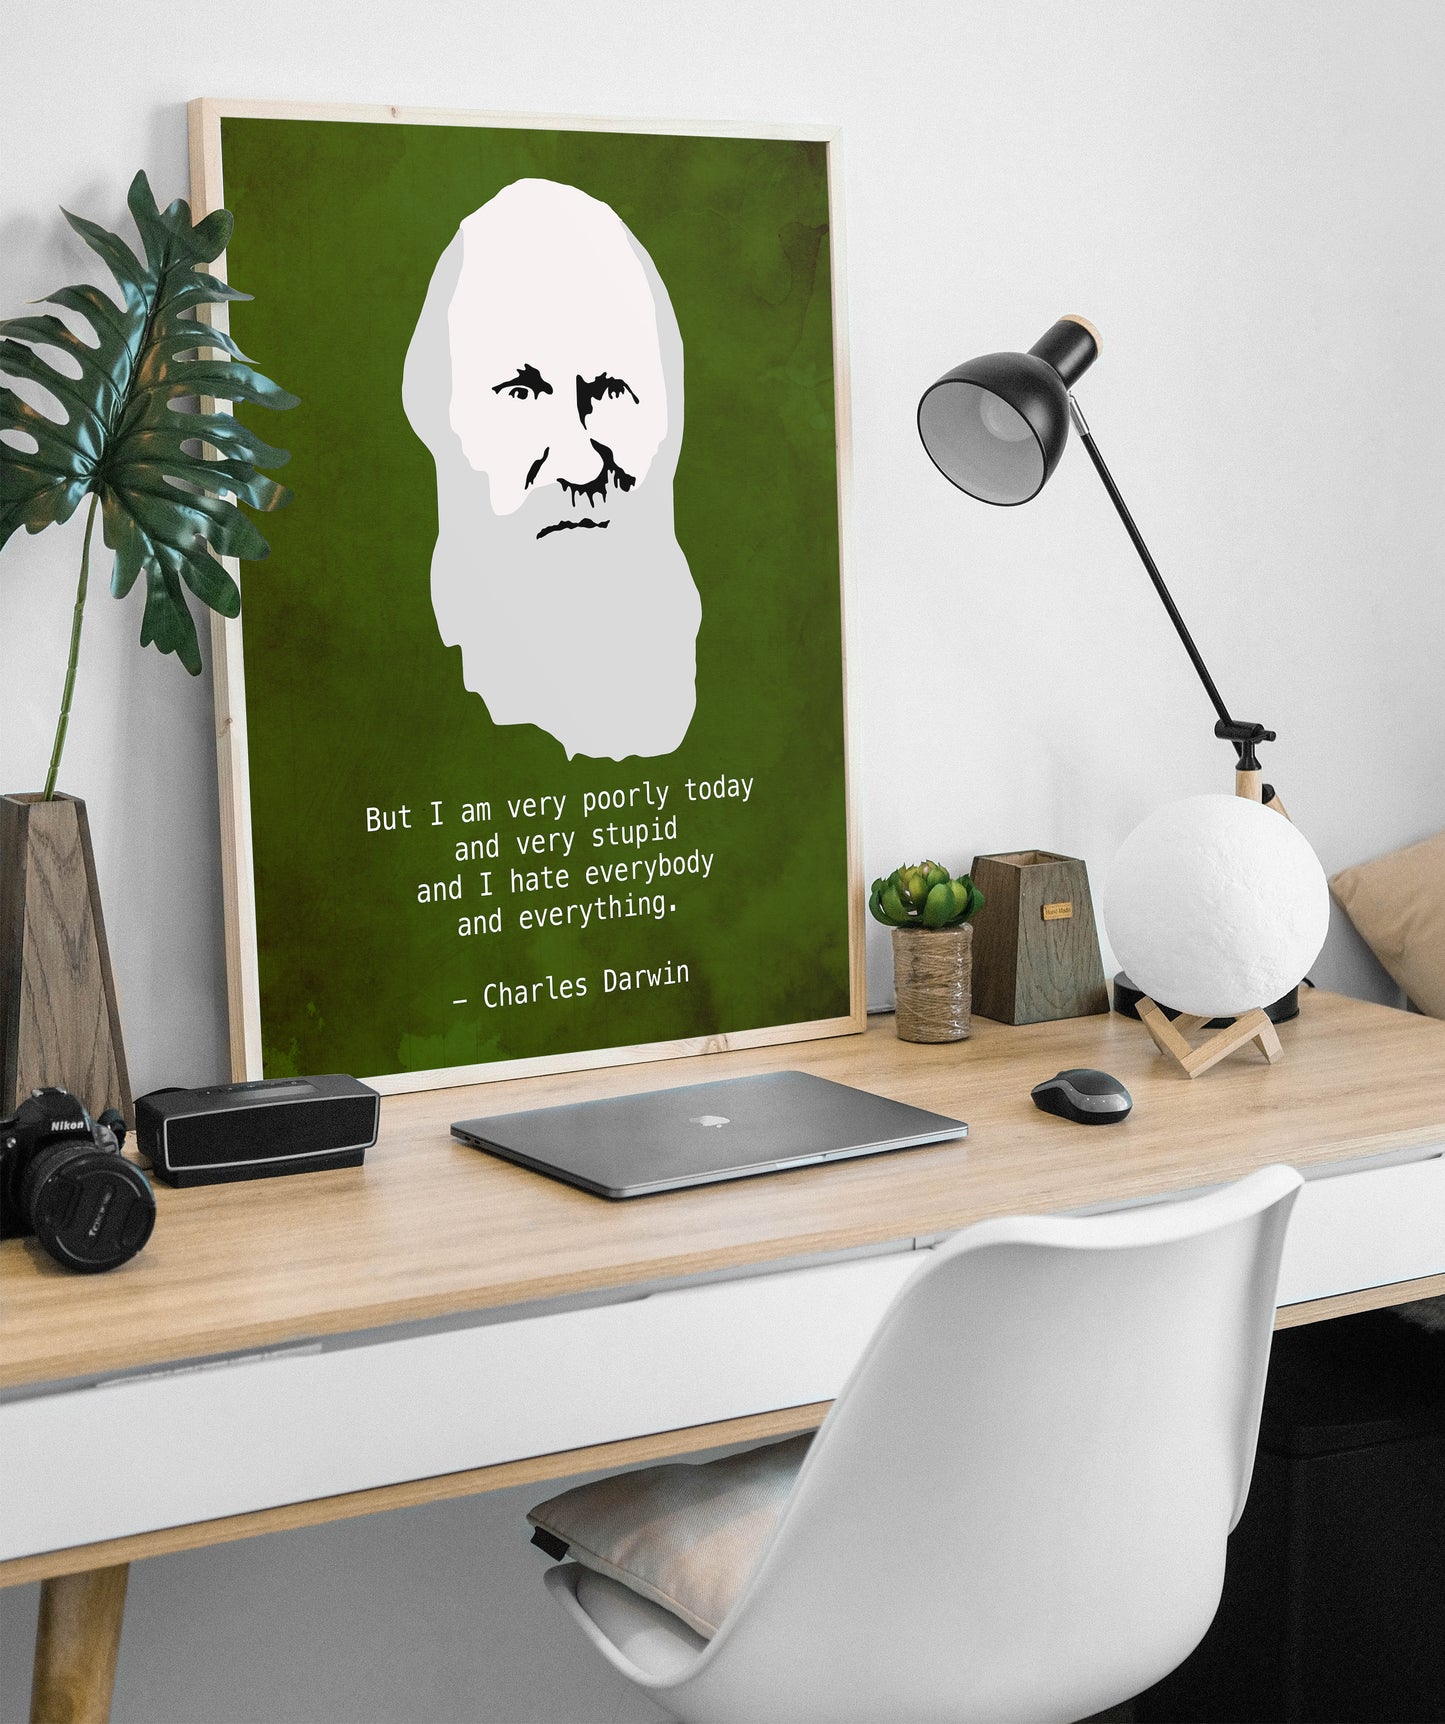 Charles Darwin Grumpy Quote Art Print, Portrait and Funny Introvert Decor